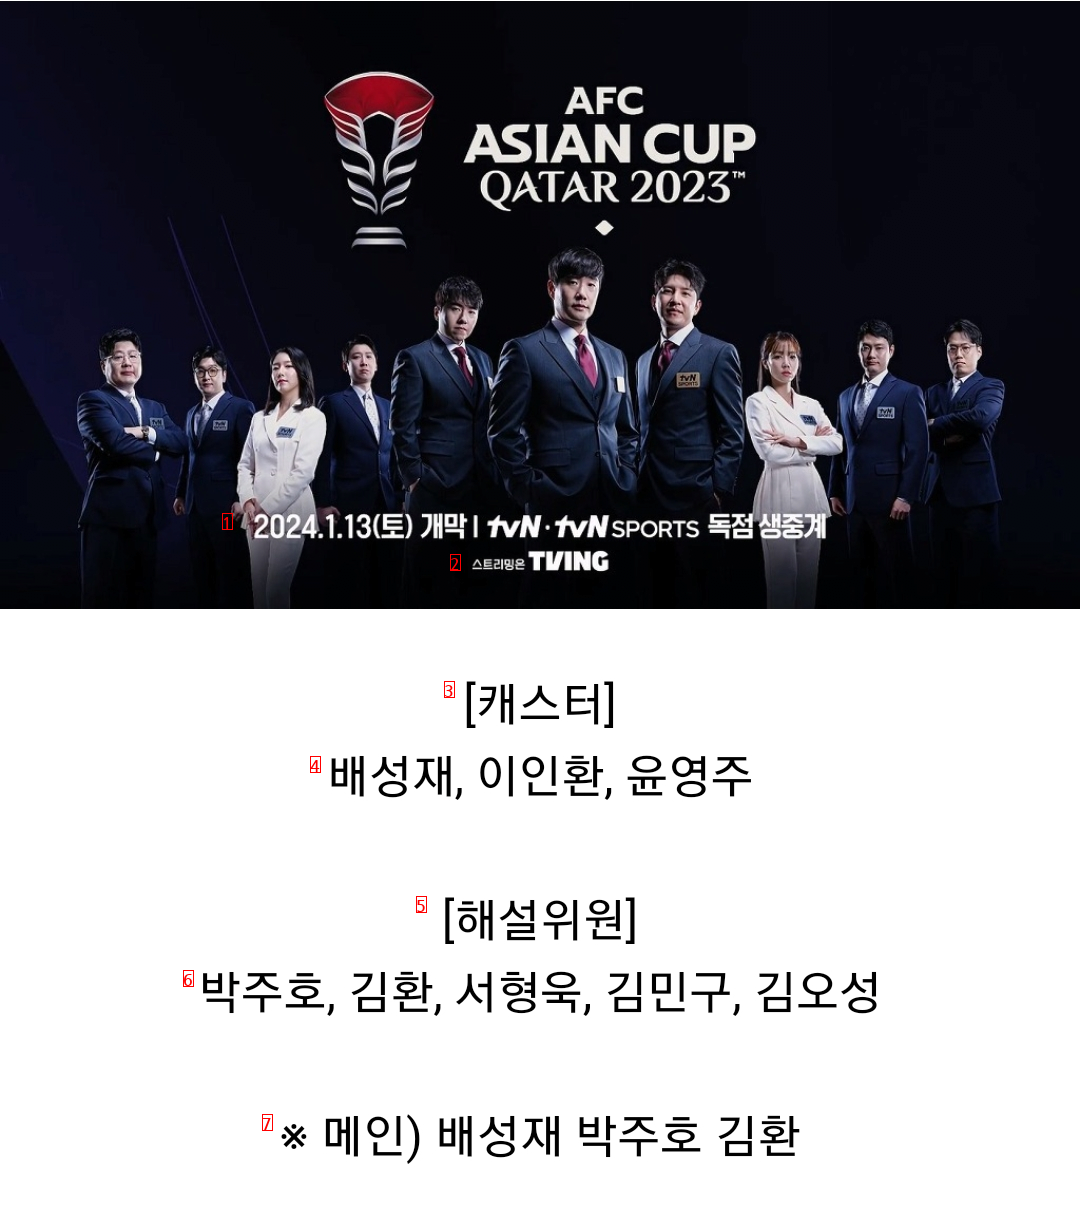 Official 2023 Asian Cup TV coverage confirmed